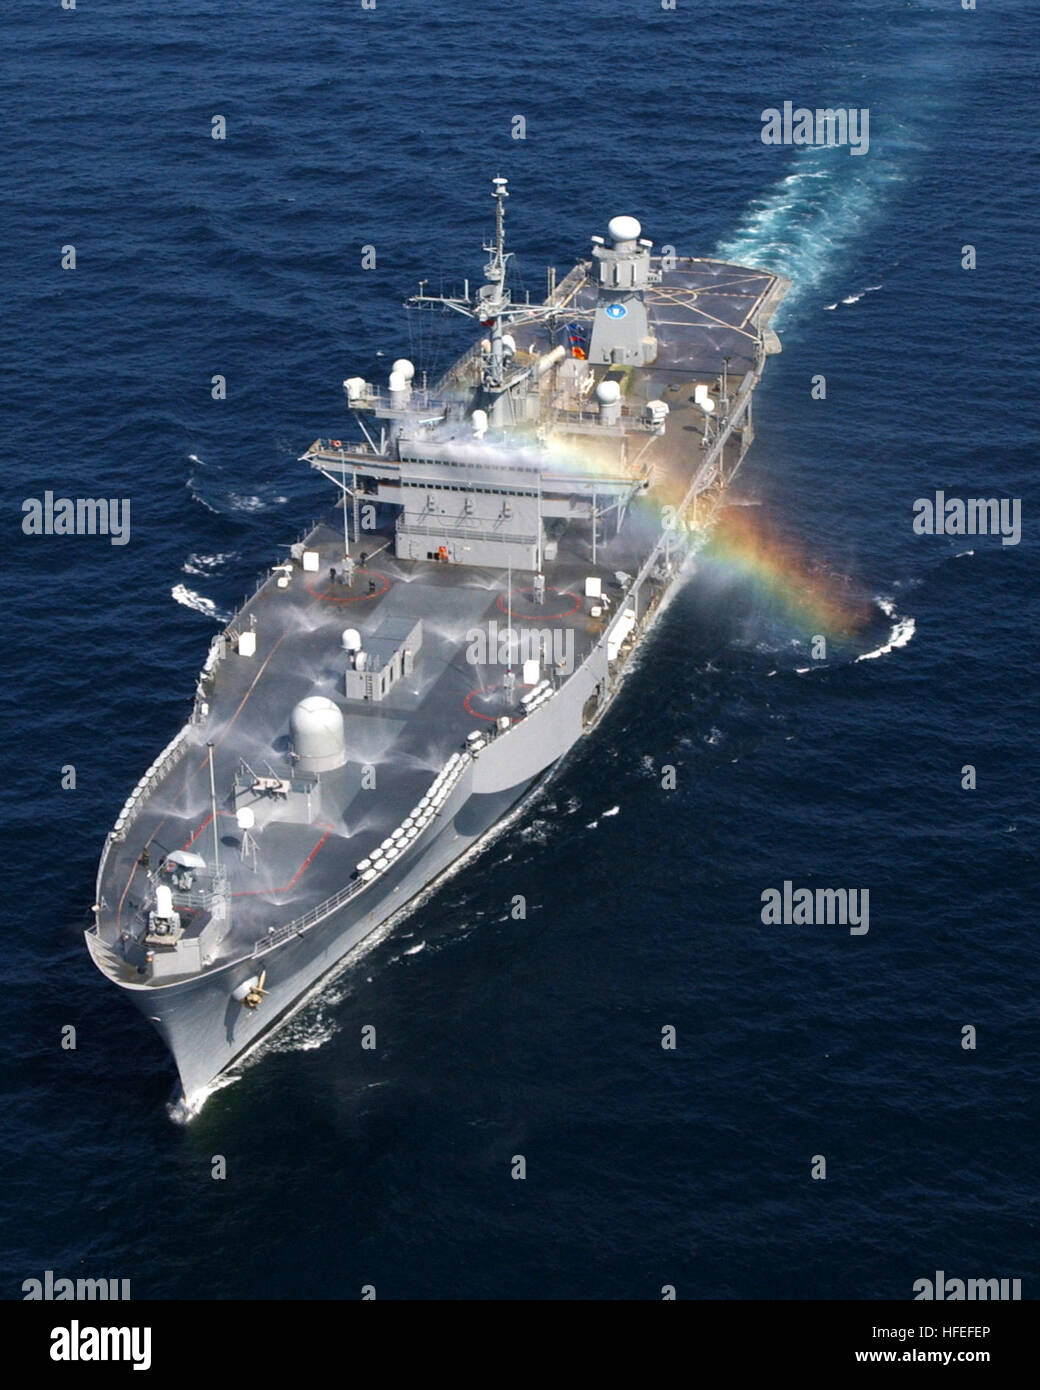 030205-N-4294K-002 Horn of Africa (Feb. 5, 2003) - A small rainbow cascades across the 2nd Fleet command and control ship USS Mount Whitney (LCC 20) as she tests her Counter Measure Wash Down System (CMWDS). The wash-down system is used to help the ship combat a Chemical, Biological or Radiological attack. Mount Whitney and embarked Marines are deployed to the Horn of Africa region to participate in Operation Enduring Freedom (OEF) and the continuing Global War on Terrorism. U.S. Navy photo by Photographer's Mate 2nd Class George Kusner. (RELEASED) US Navy 030205-N-4294K-002 A small rainbow ca Stock Photo